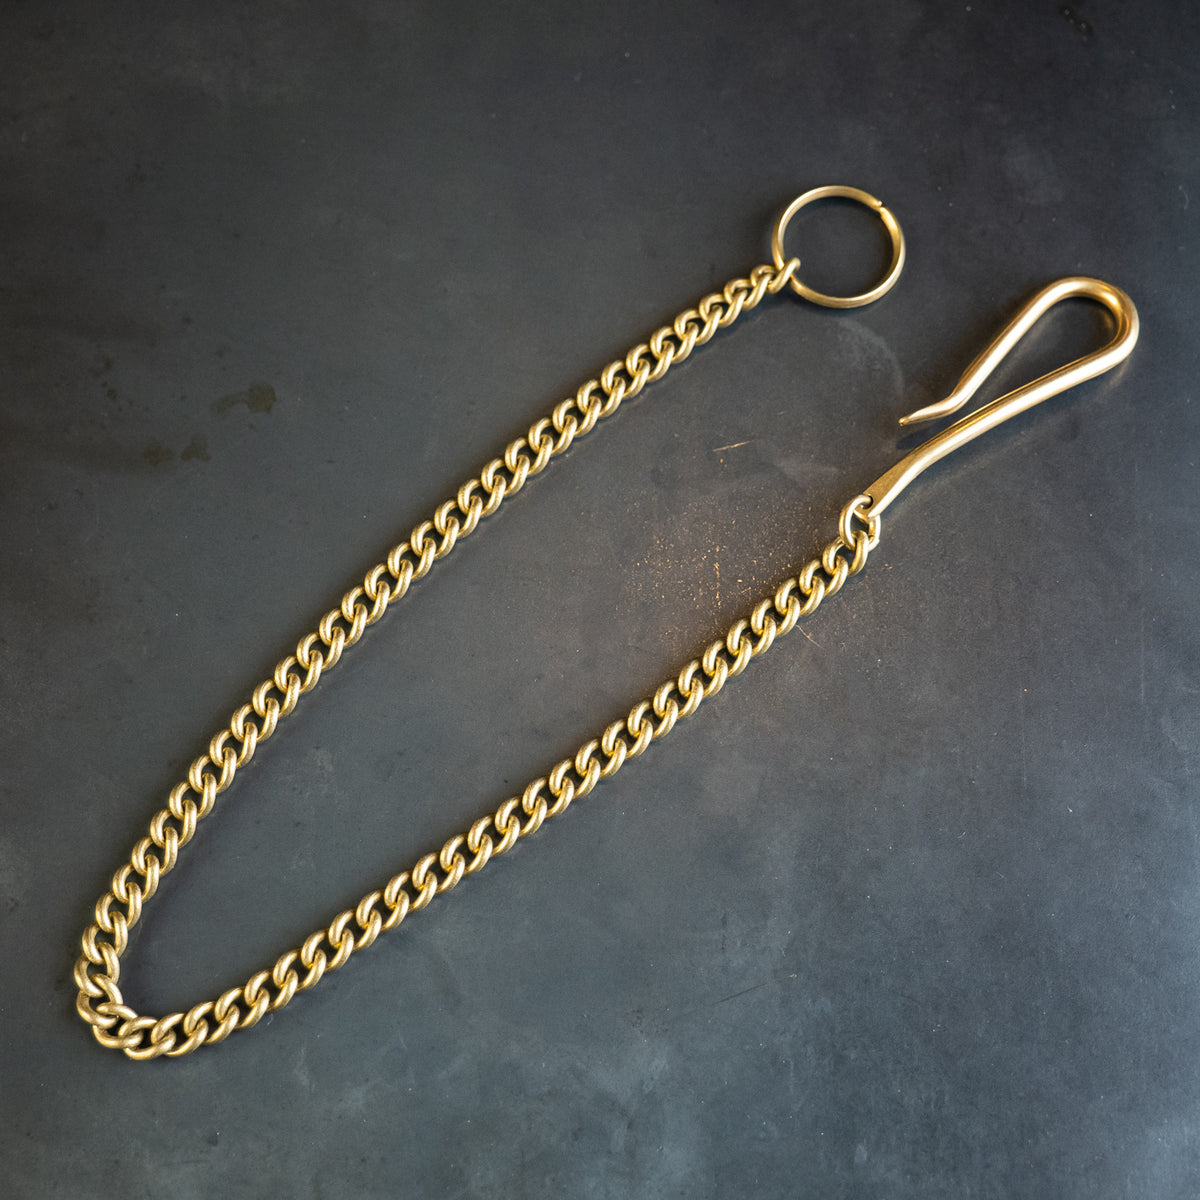 Iron Heart Wallet Chain with Hook and Rings - Brass